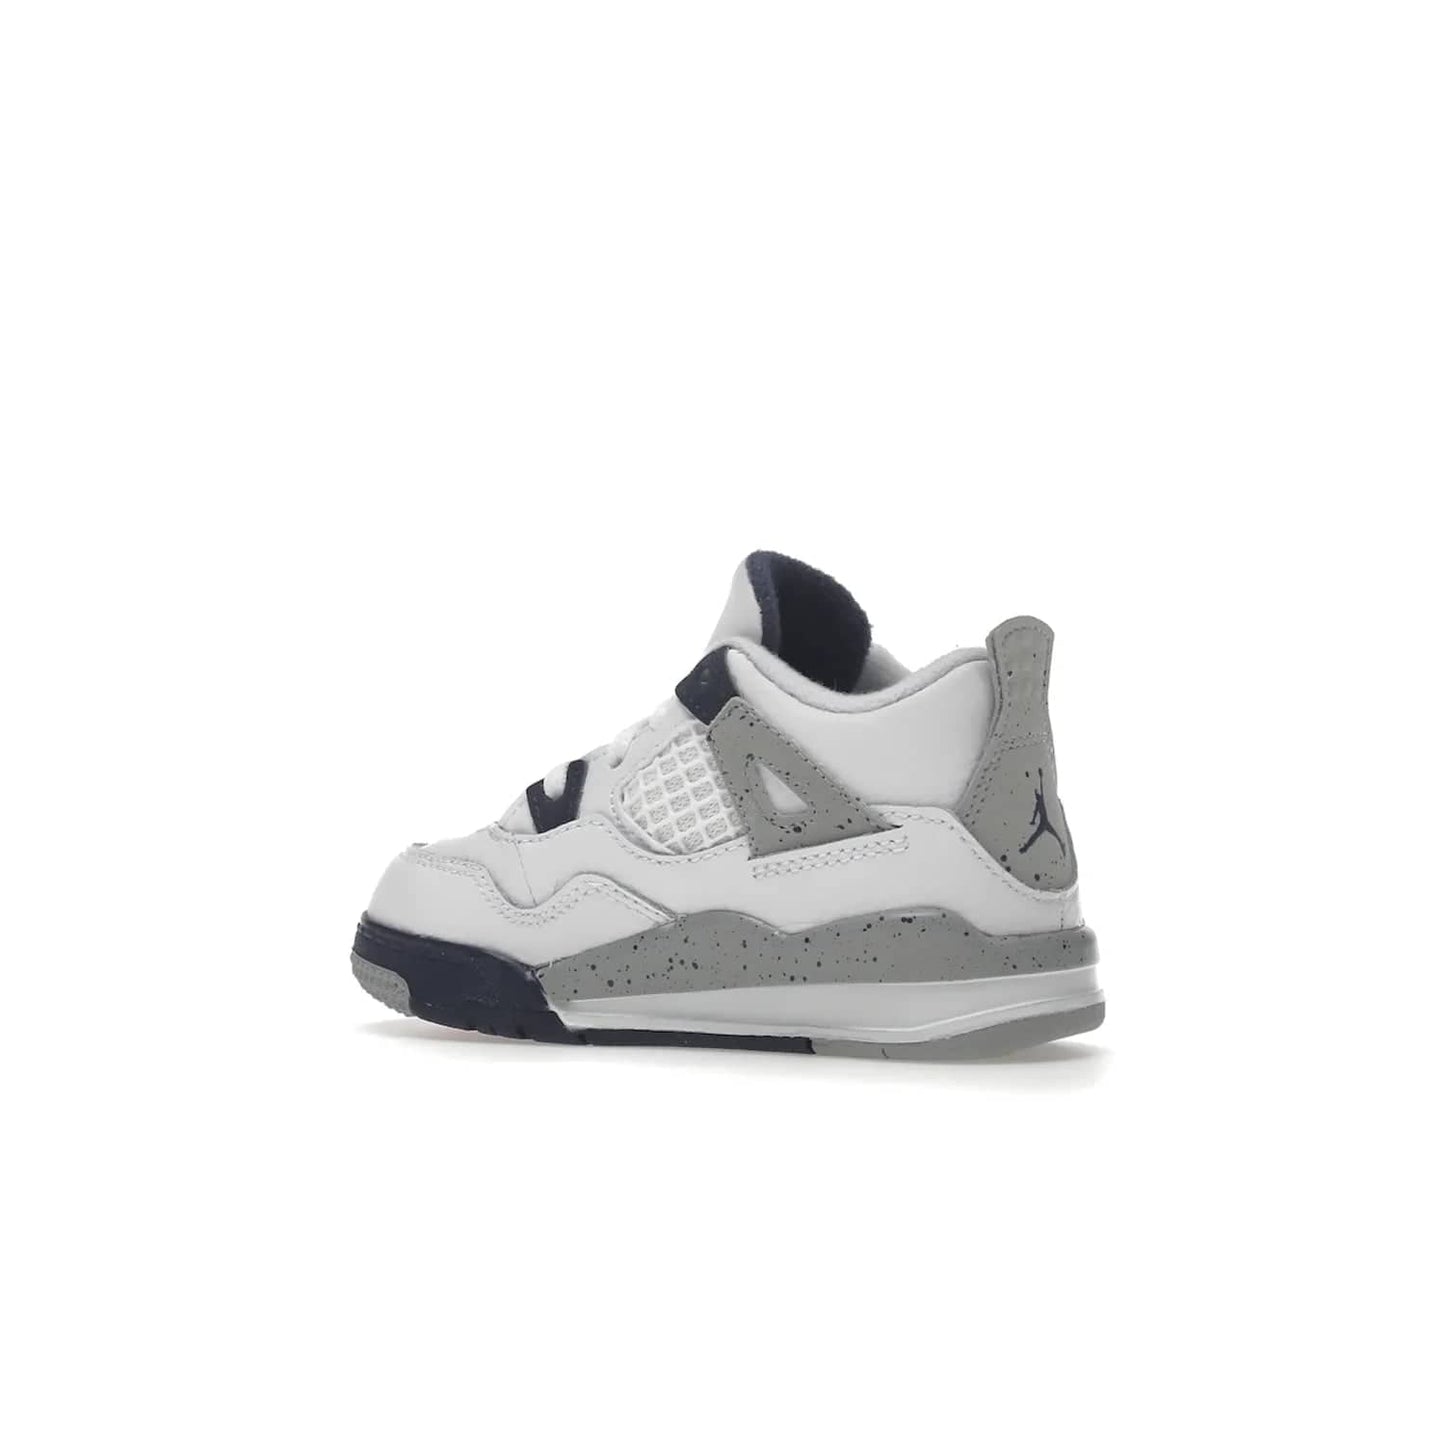 Jordan 4 Retro Midnight Navy (TD) - Image 22 - Only at www.BallersClubKickz.com - Introducing the Jordan 4 Retro Midnight Navy (TD) for kids. White leather upper with navy and grey accents plus fire red detailing. Perfect for everyday wear. Get yours before they sell out.